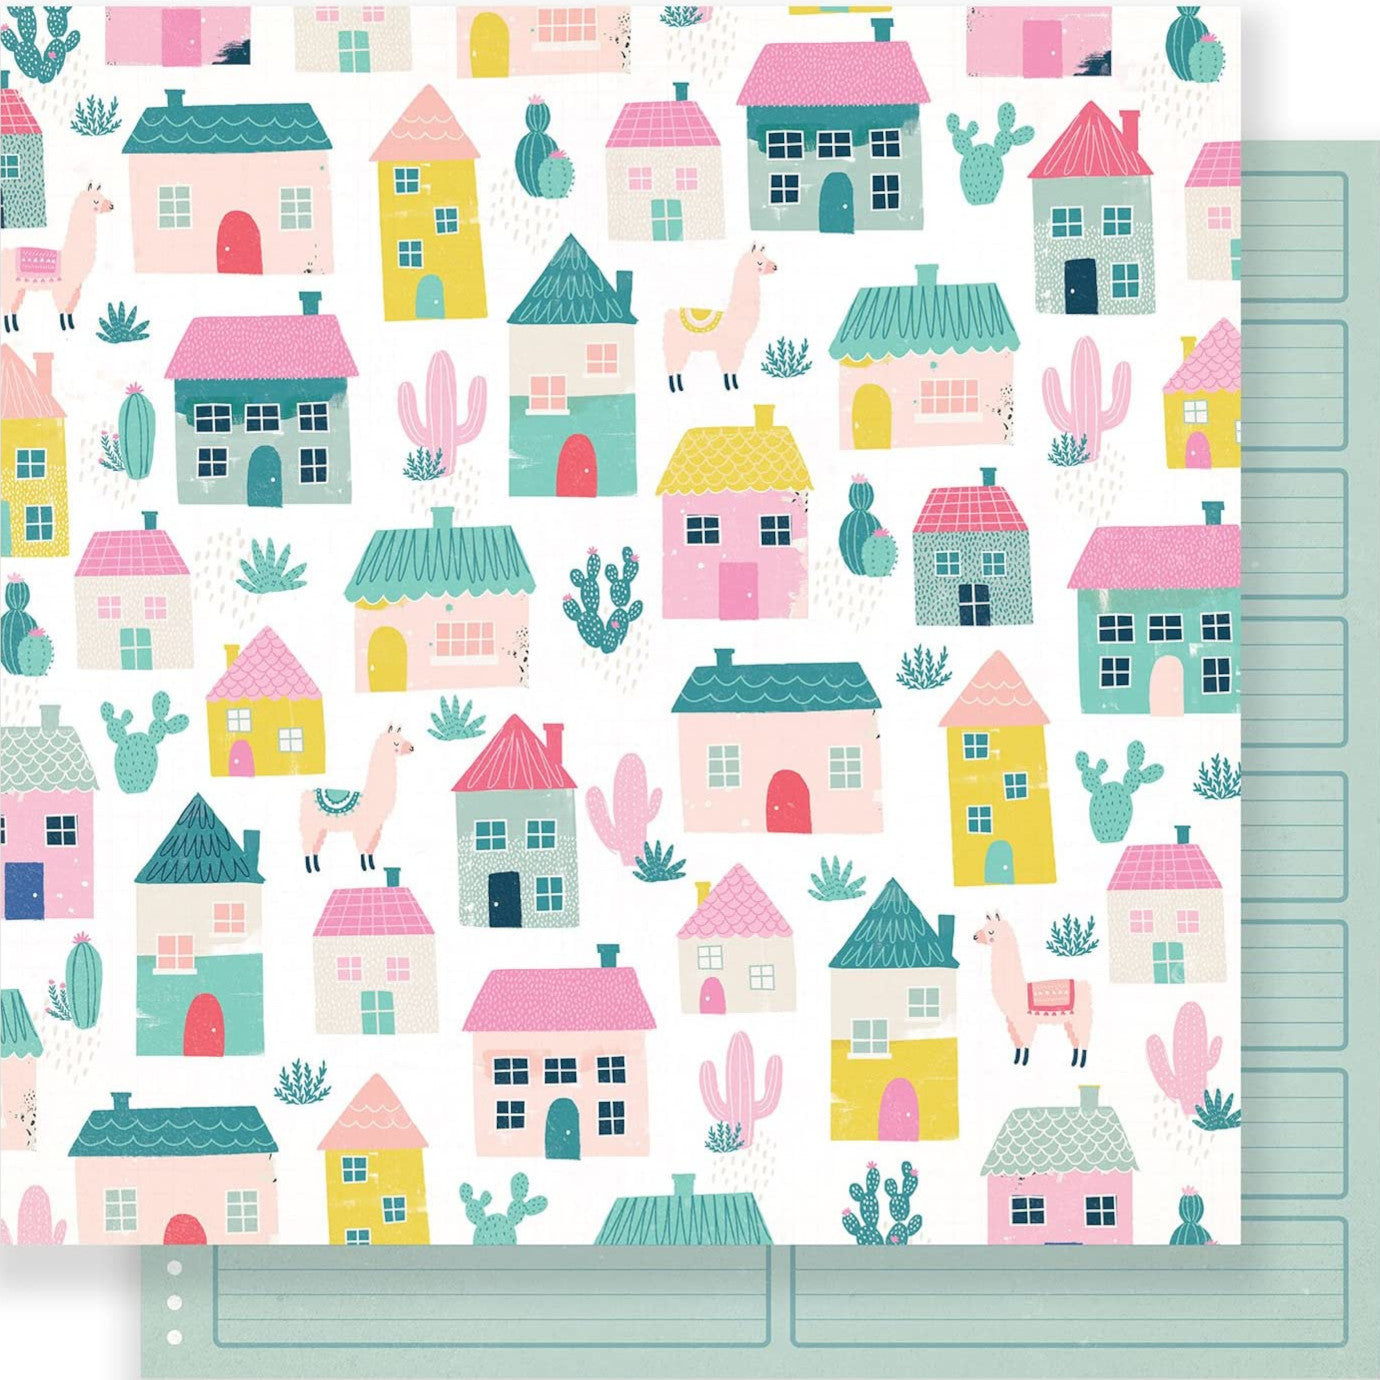 Perfection - 12x12 double-sided patterned paper with colorful houses on one side and green ledger paper on reverse - Crate Paper